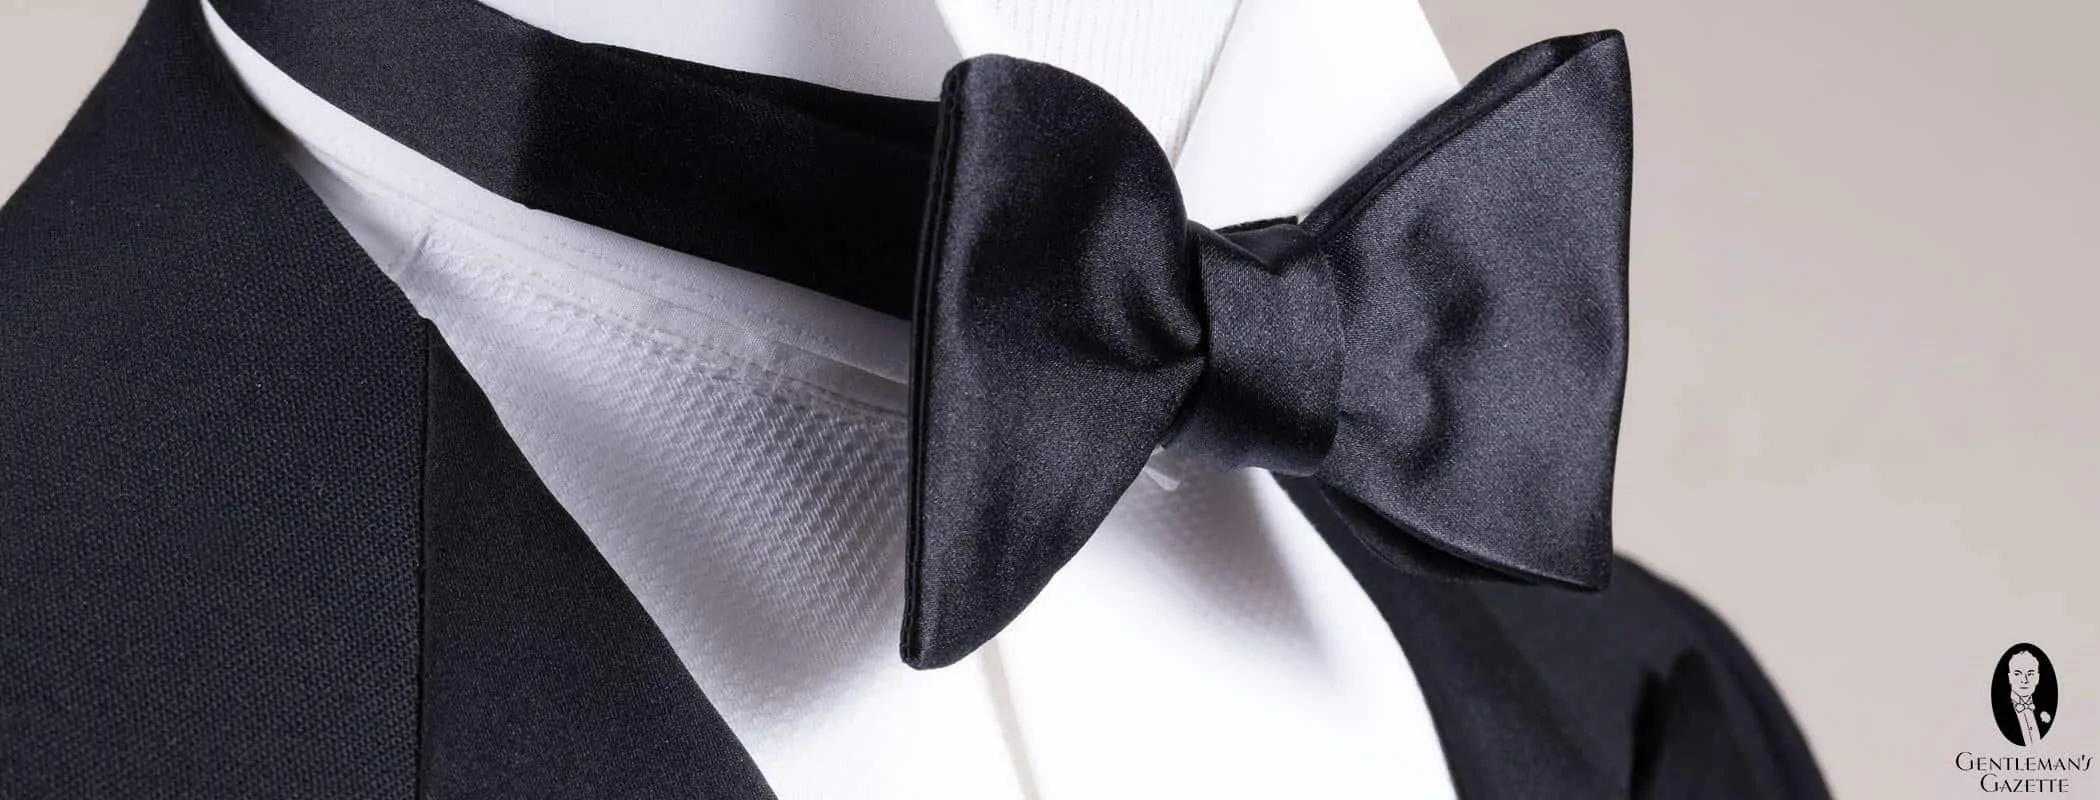 Single End Bow Tie Cover Picture